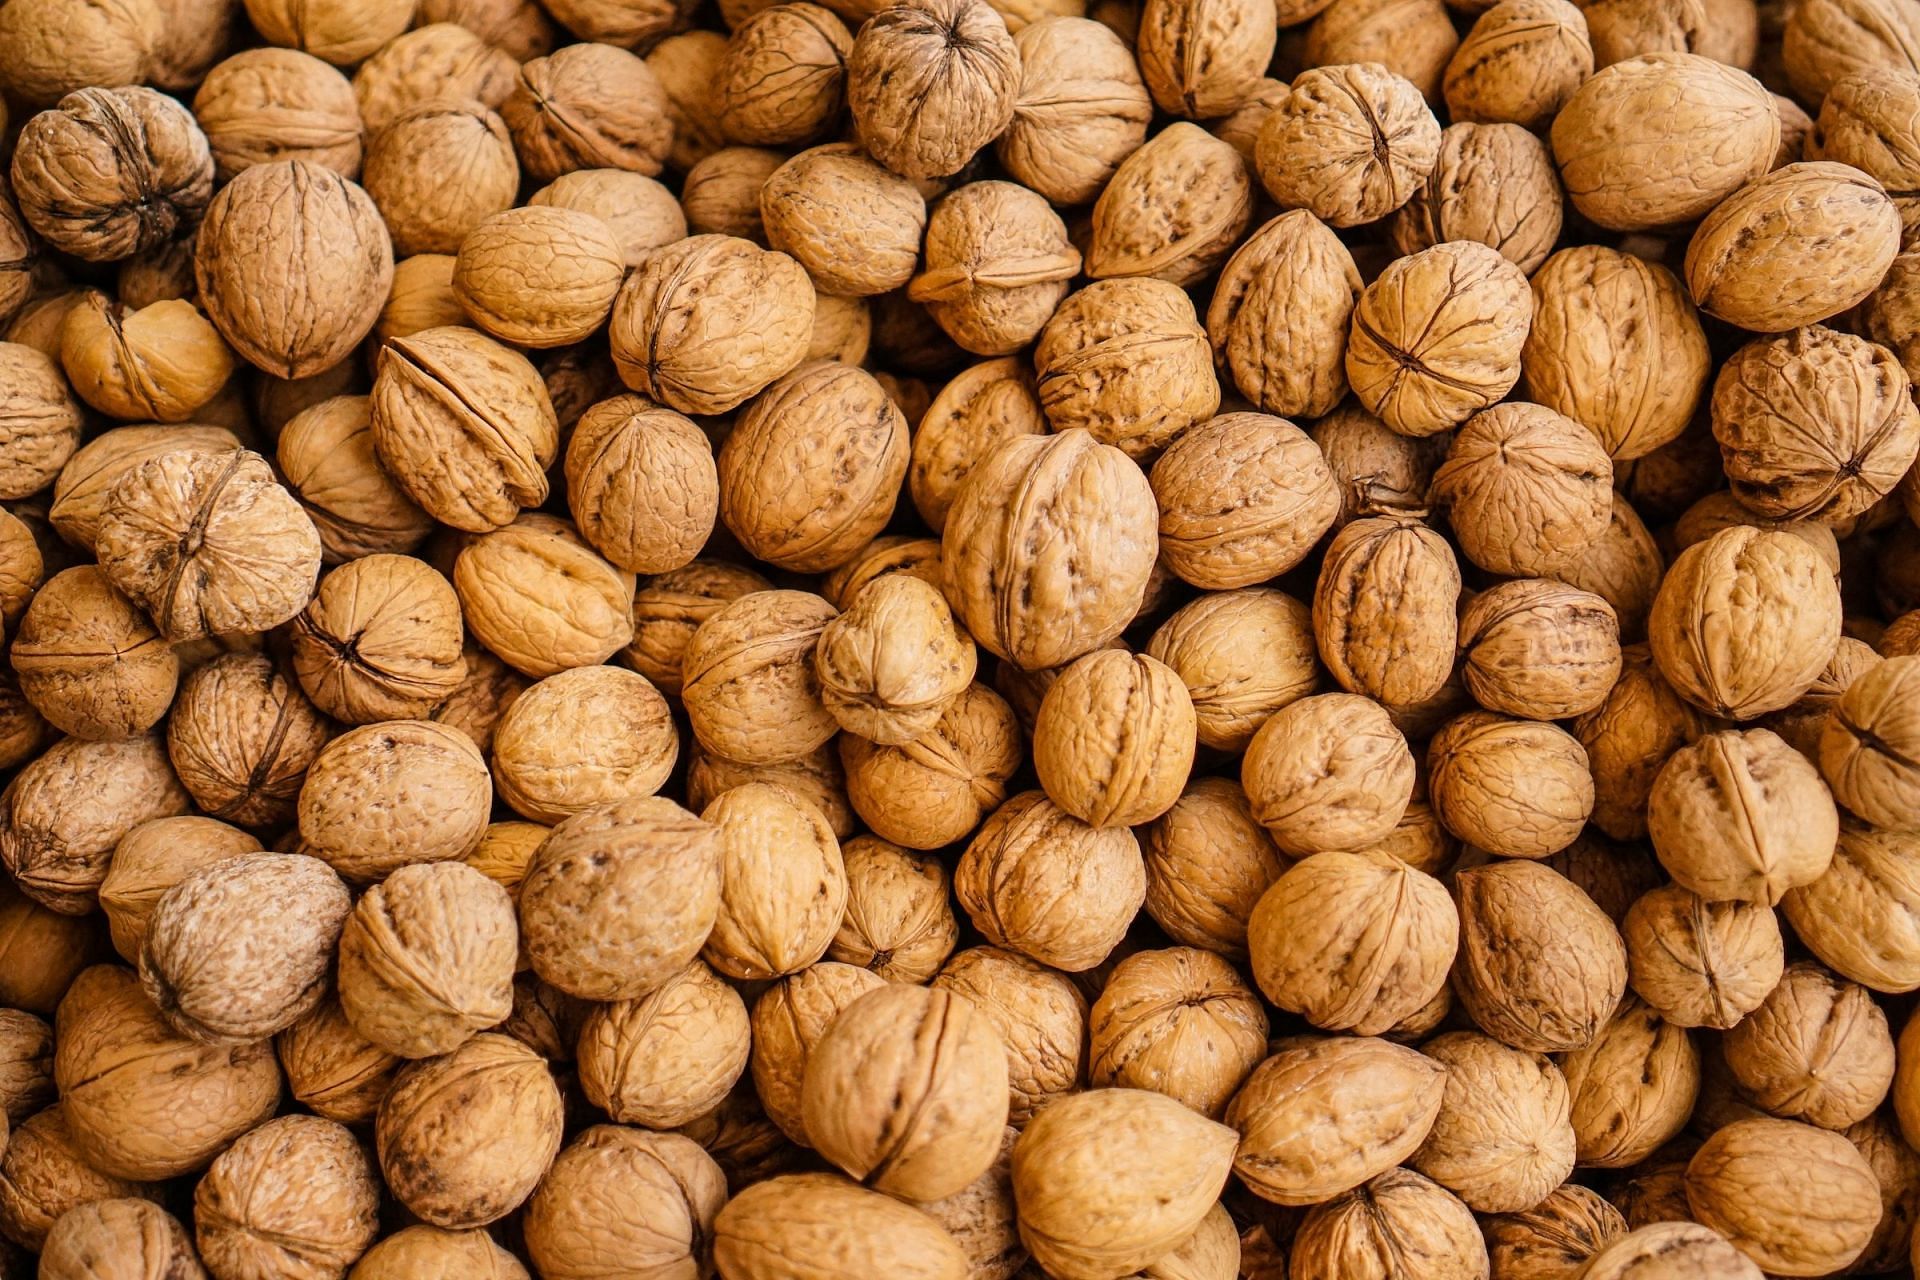 There are several benefits that make walnuts good for you (Image via Unsplash/Tom Hermans)